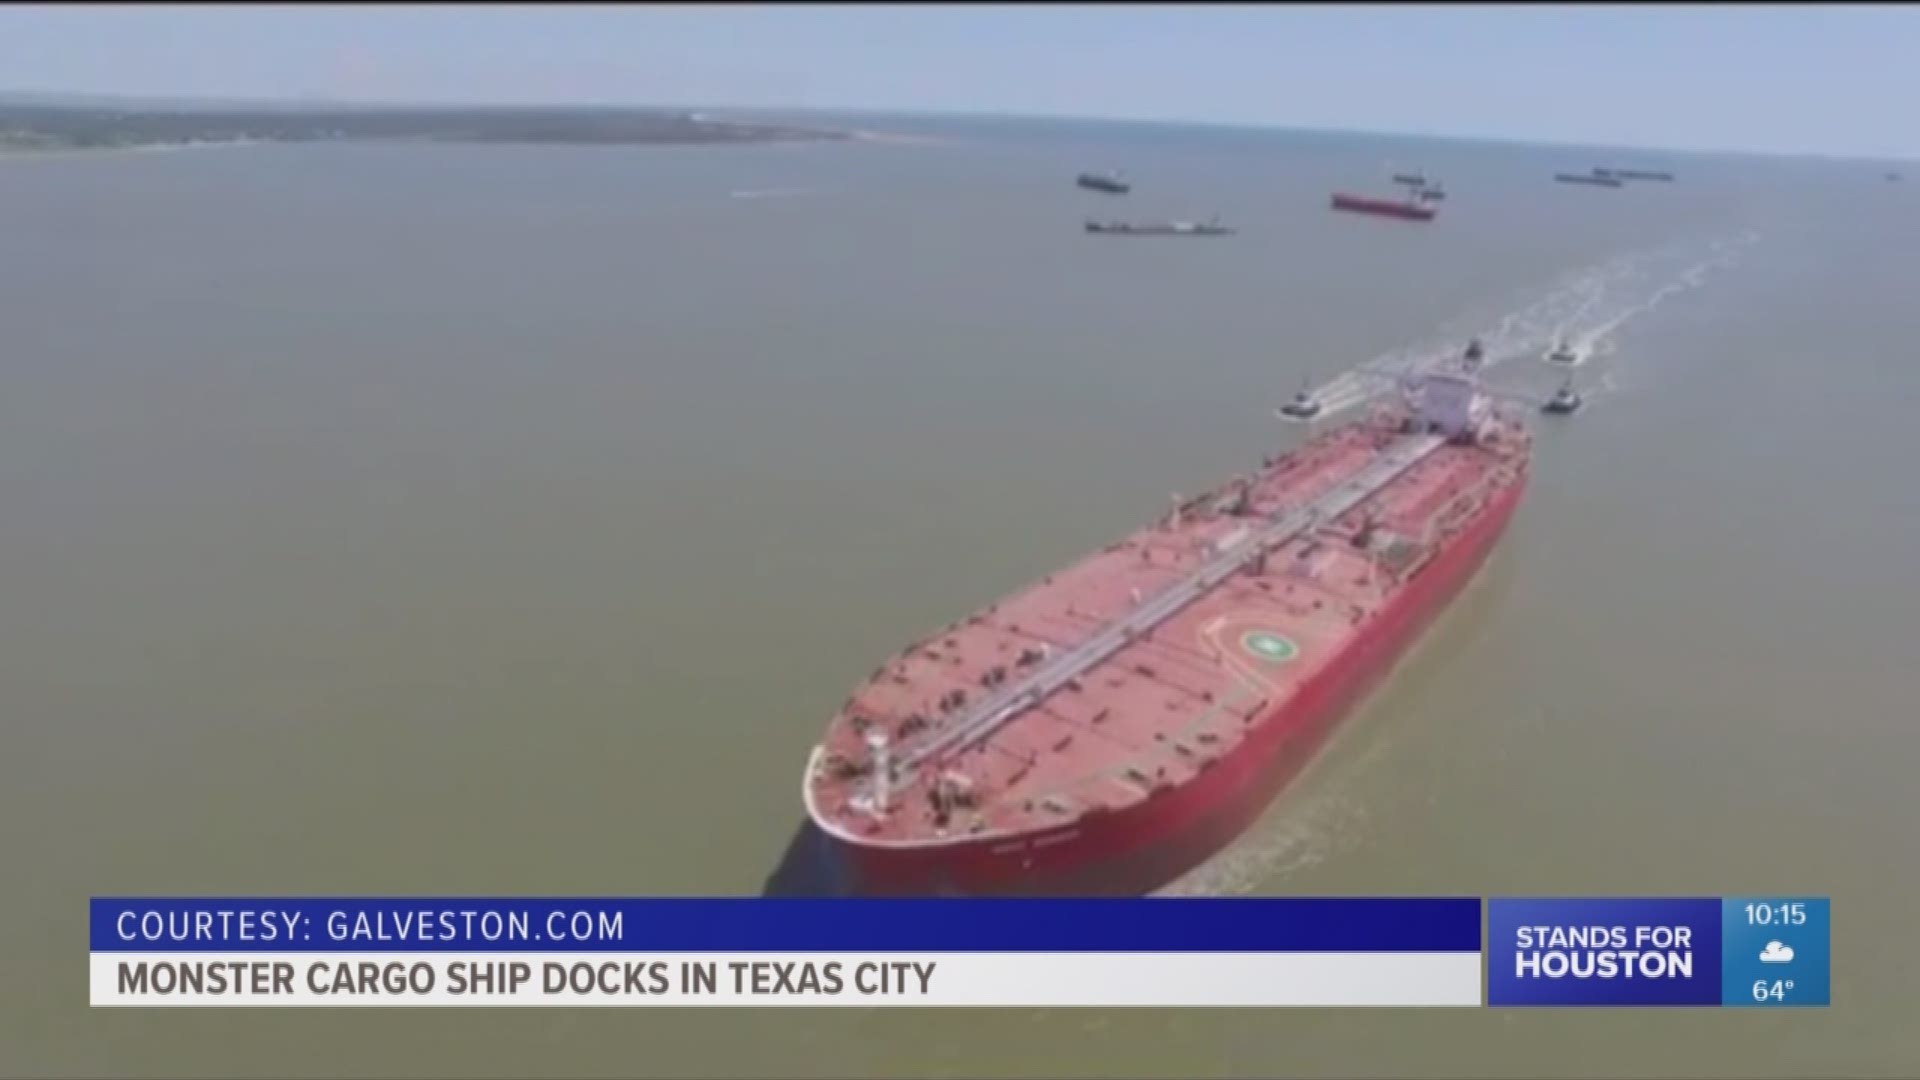 One of the largest tanker ships in the world has pulled into port in Texas City.